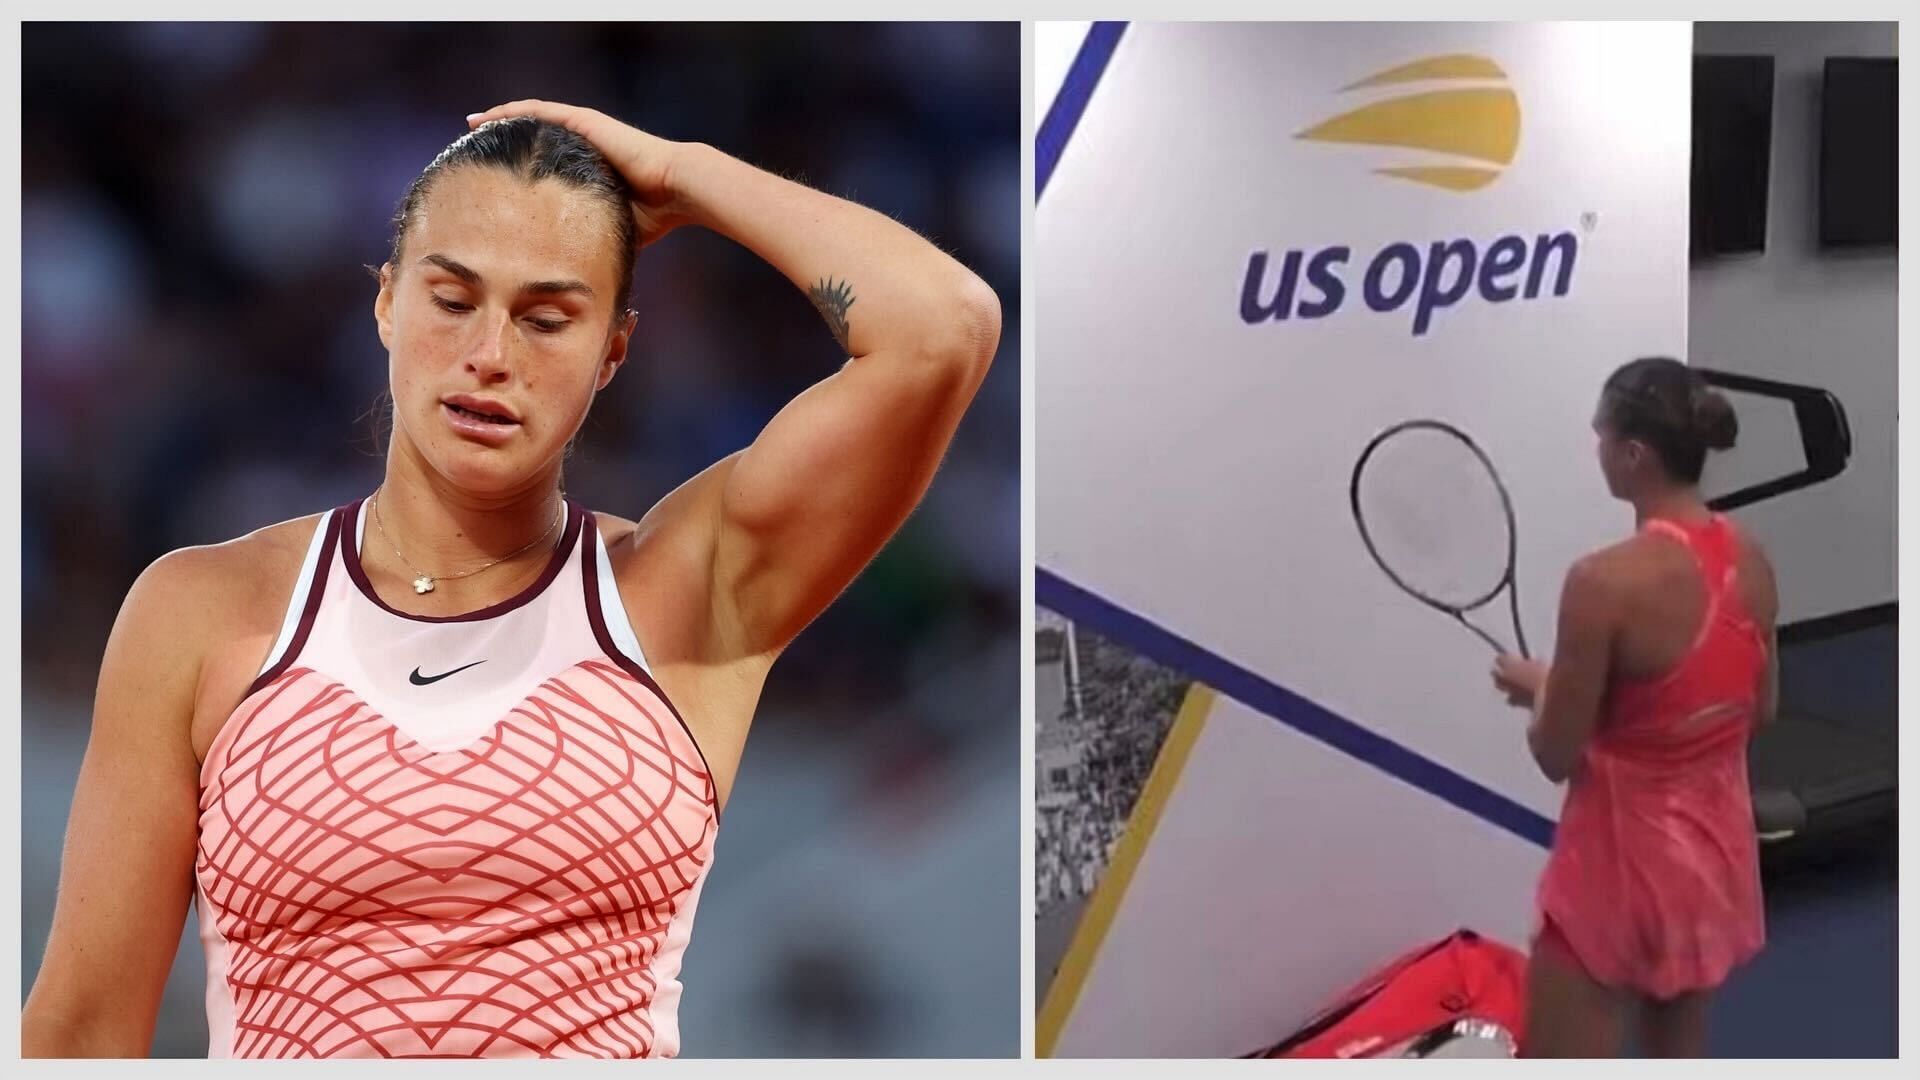 Tennis fans were miffed with Aryna Sabalenka being called &quot;woman&quot; rather than by name in outburst clip